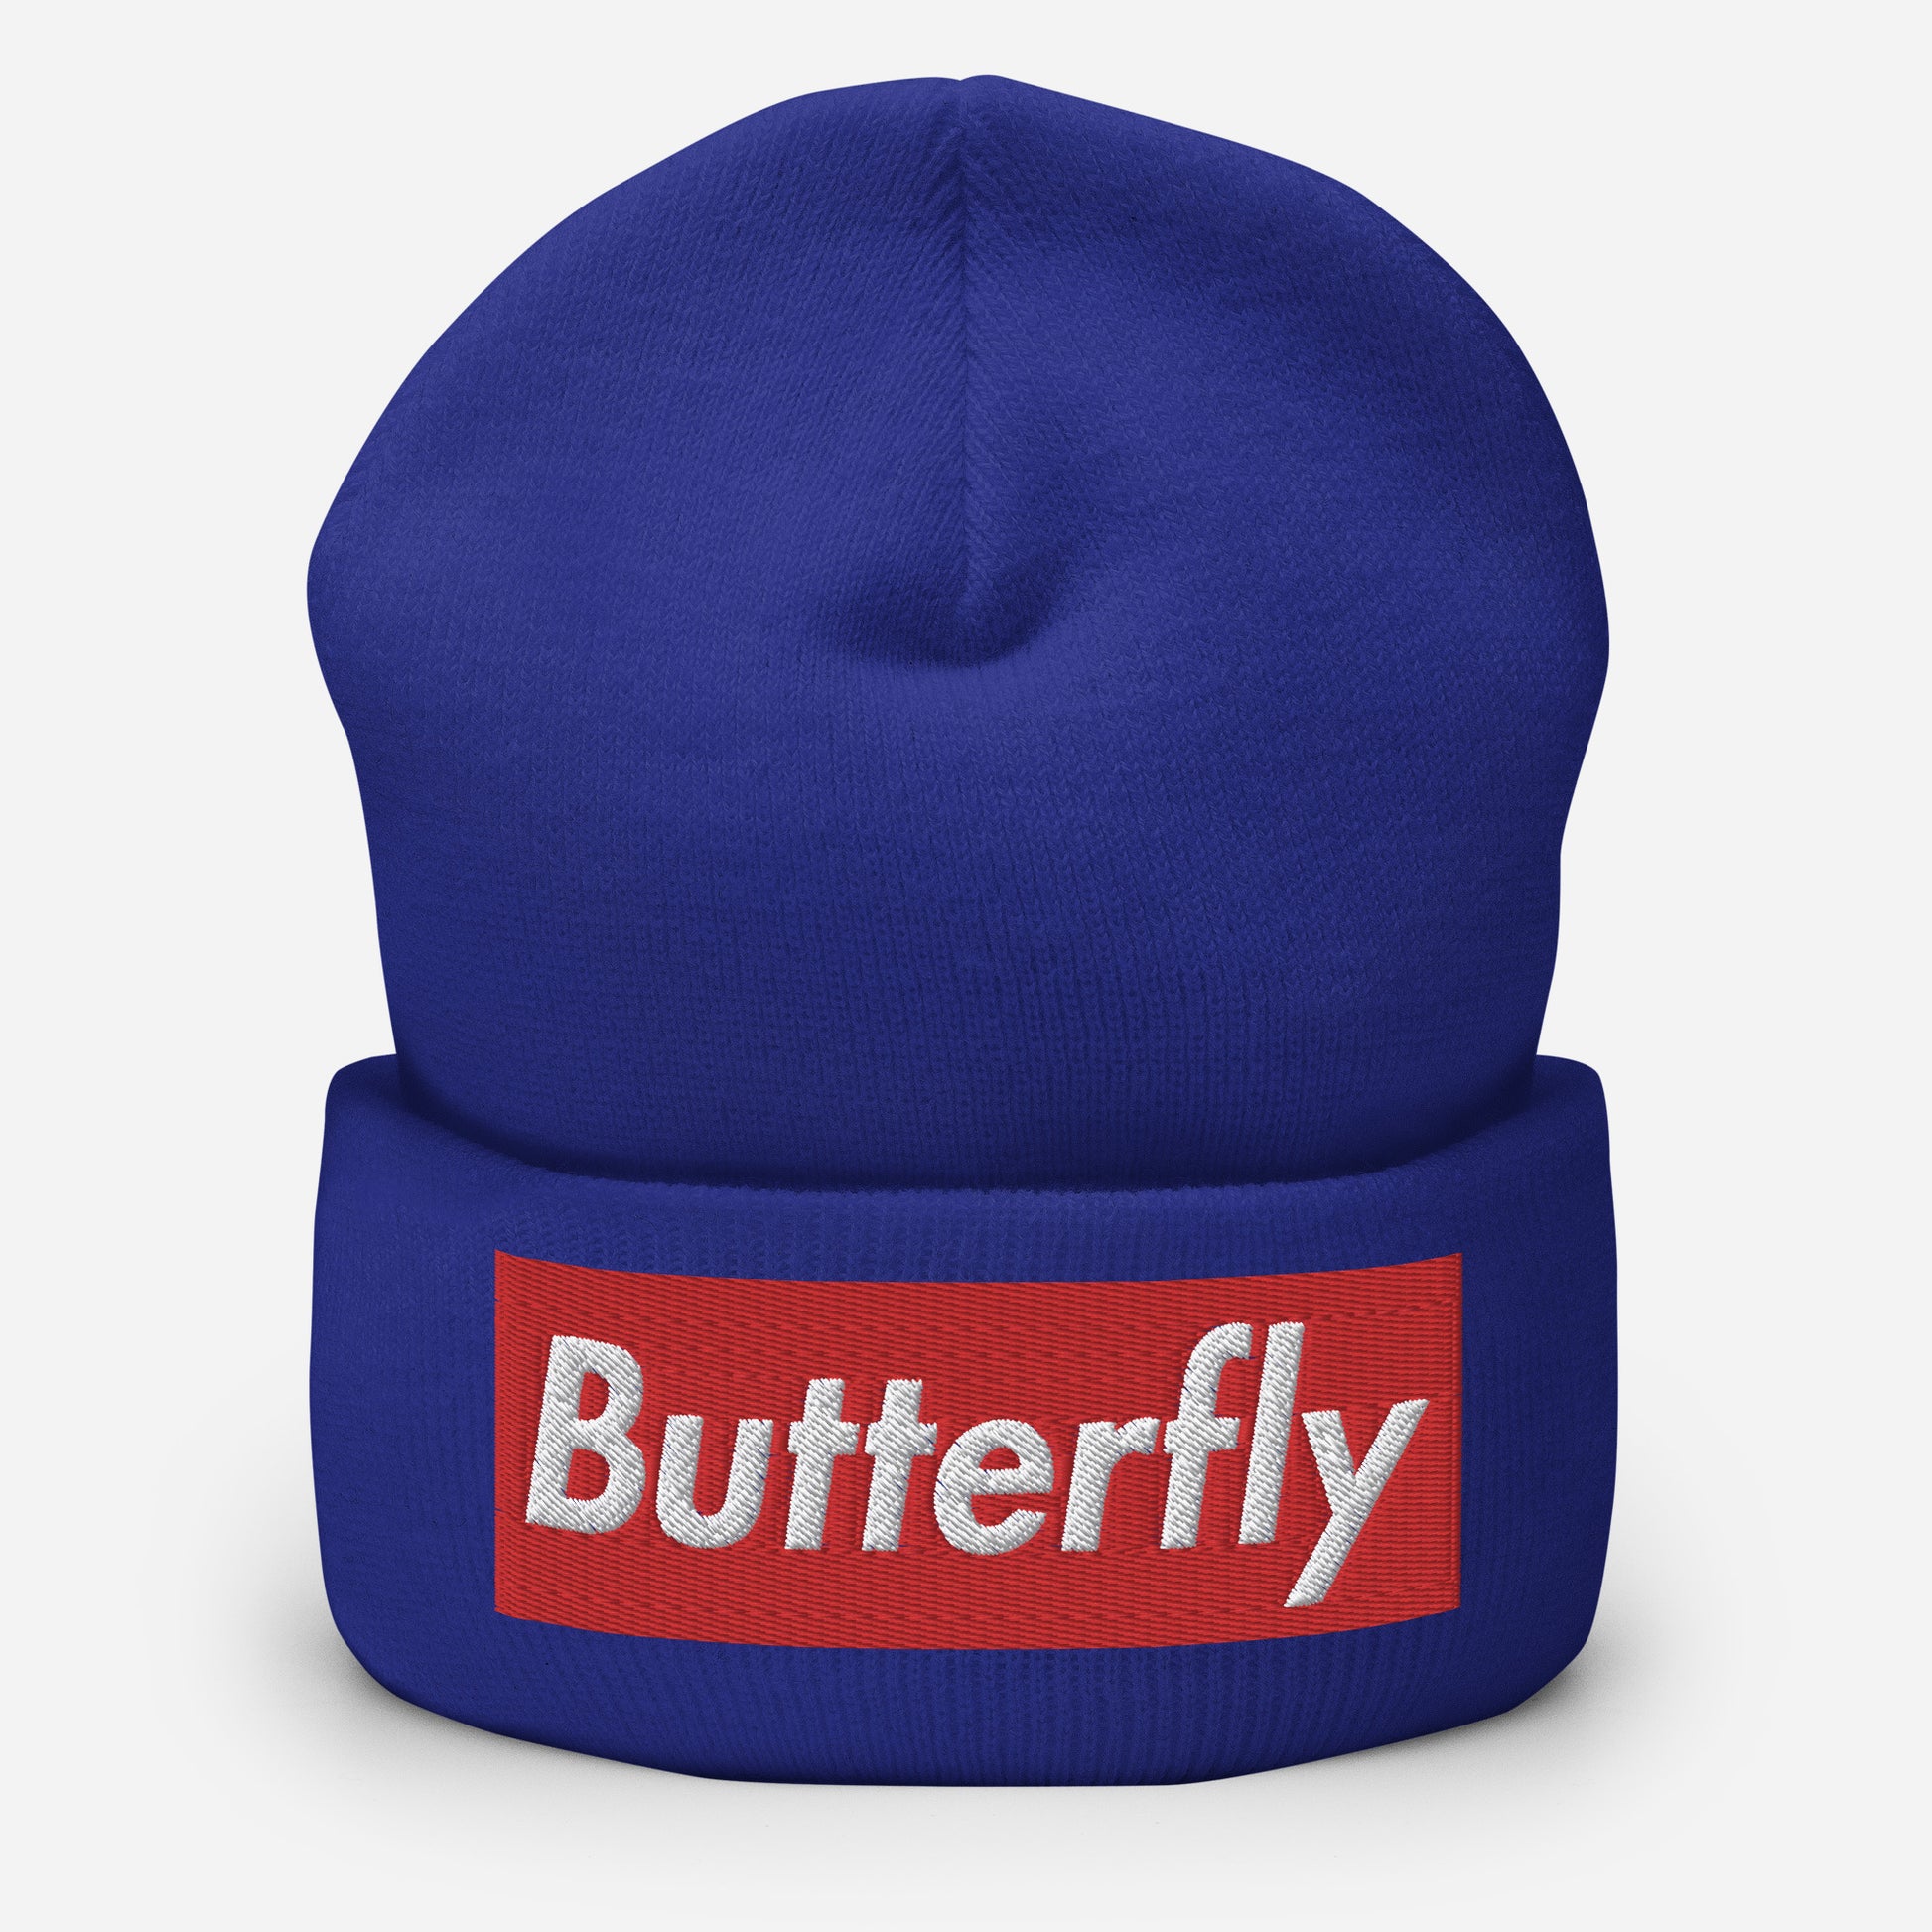 Swimmer Cuffed Beanie Butterfly Embroidery - TrendySwimmer